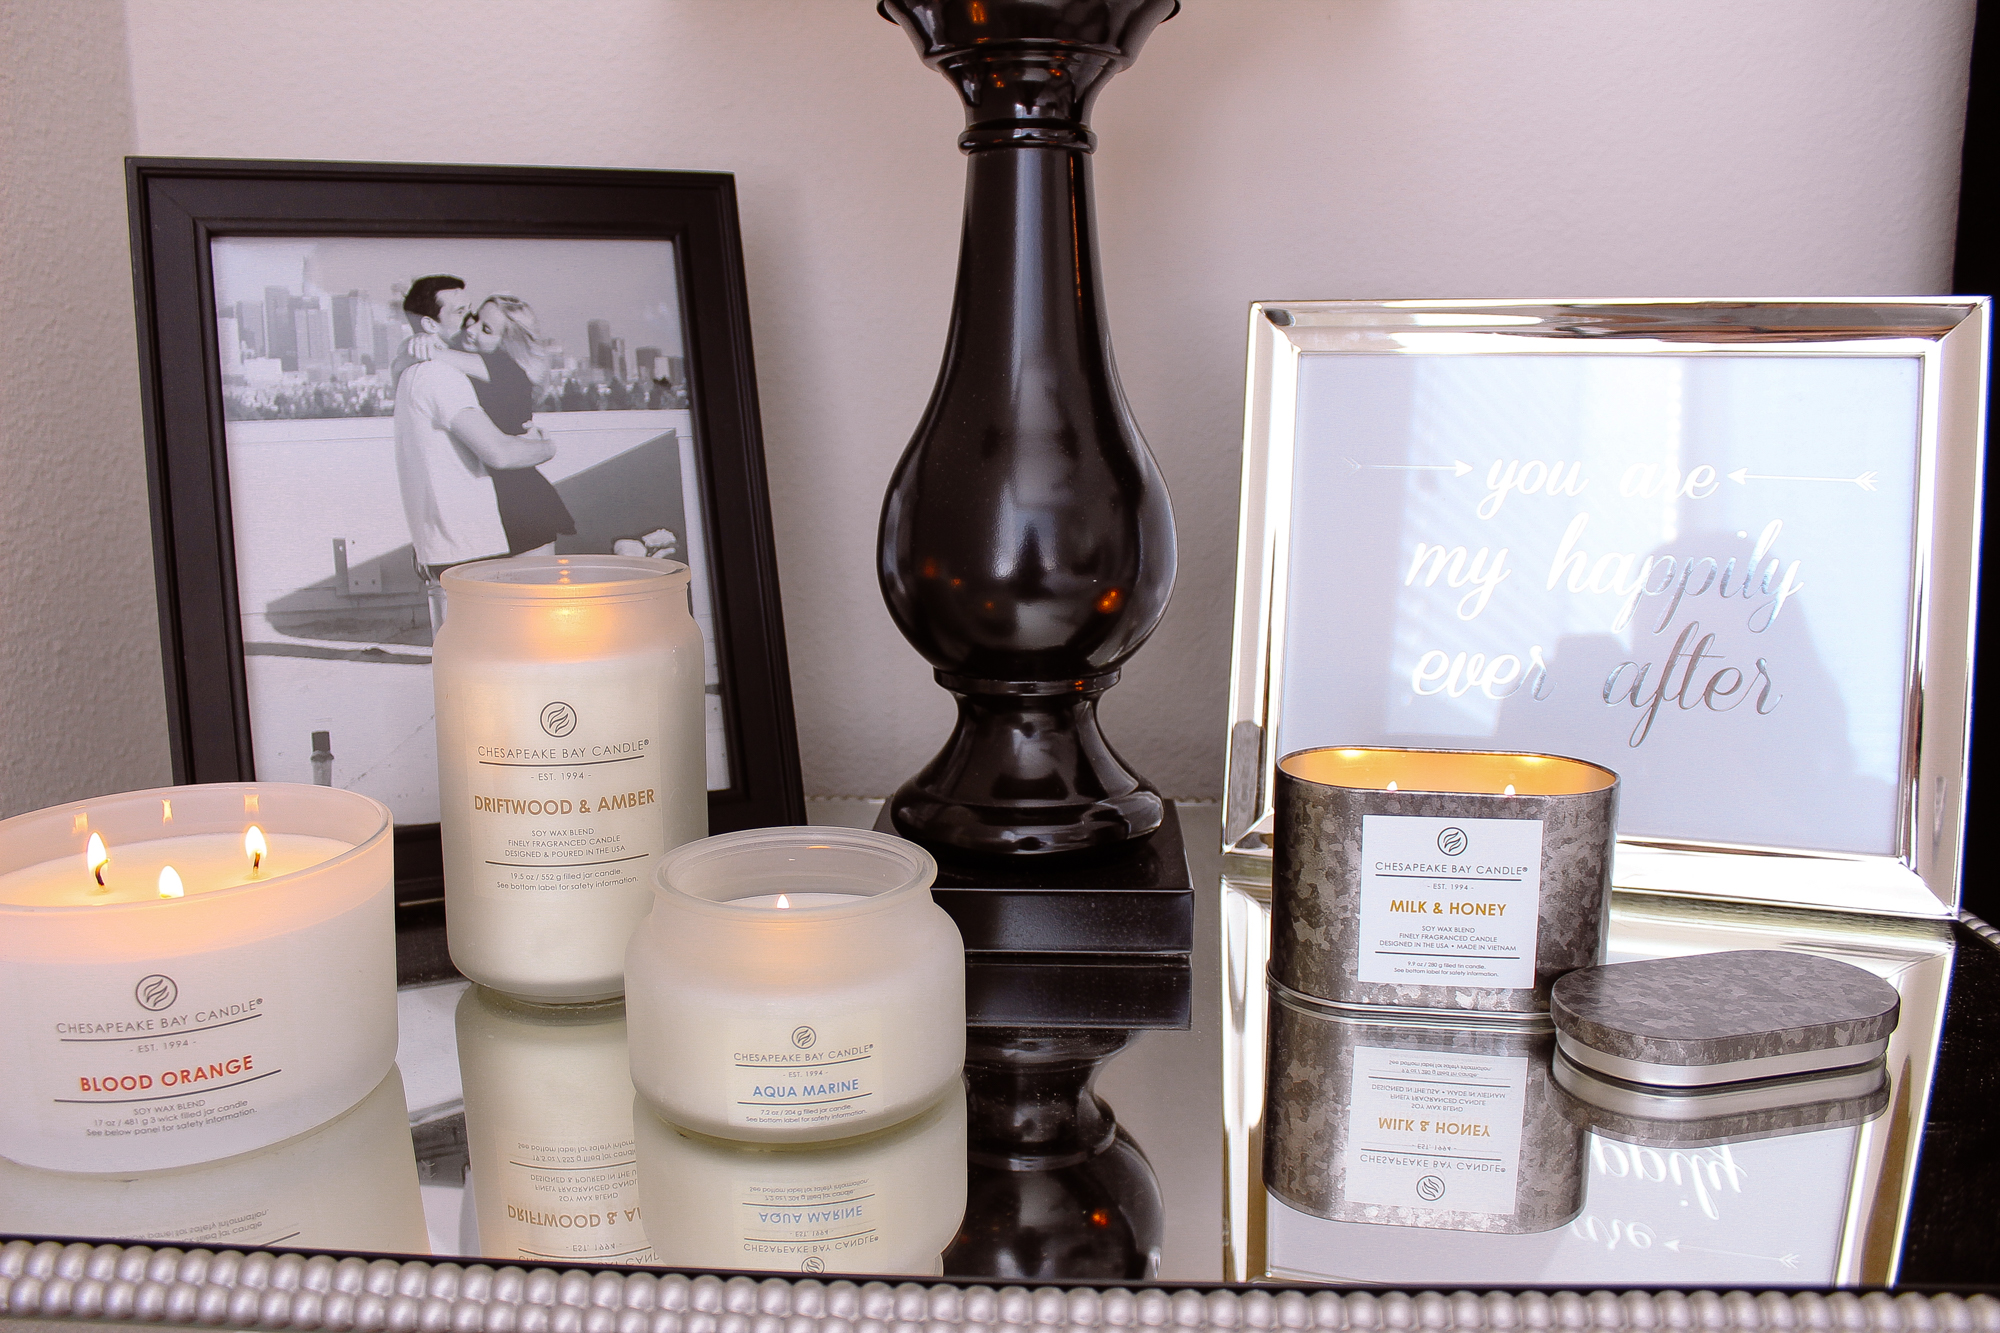 Blondie in the City At Home | Bedroom Decor | Chesapeake Candles